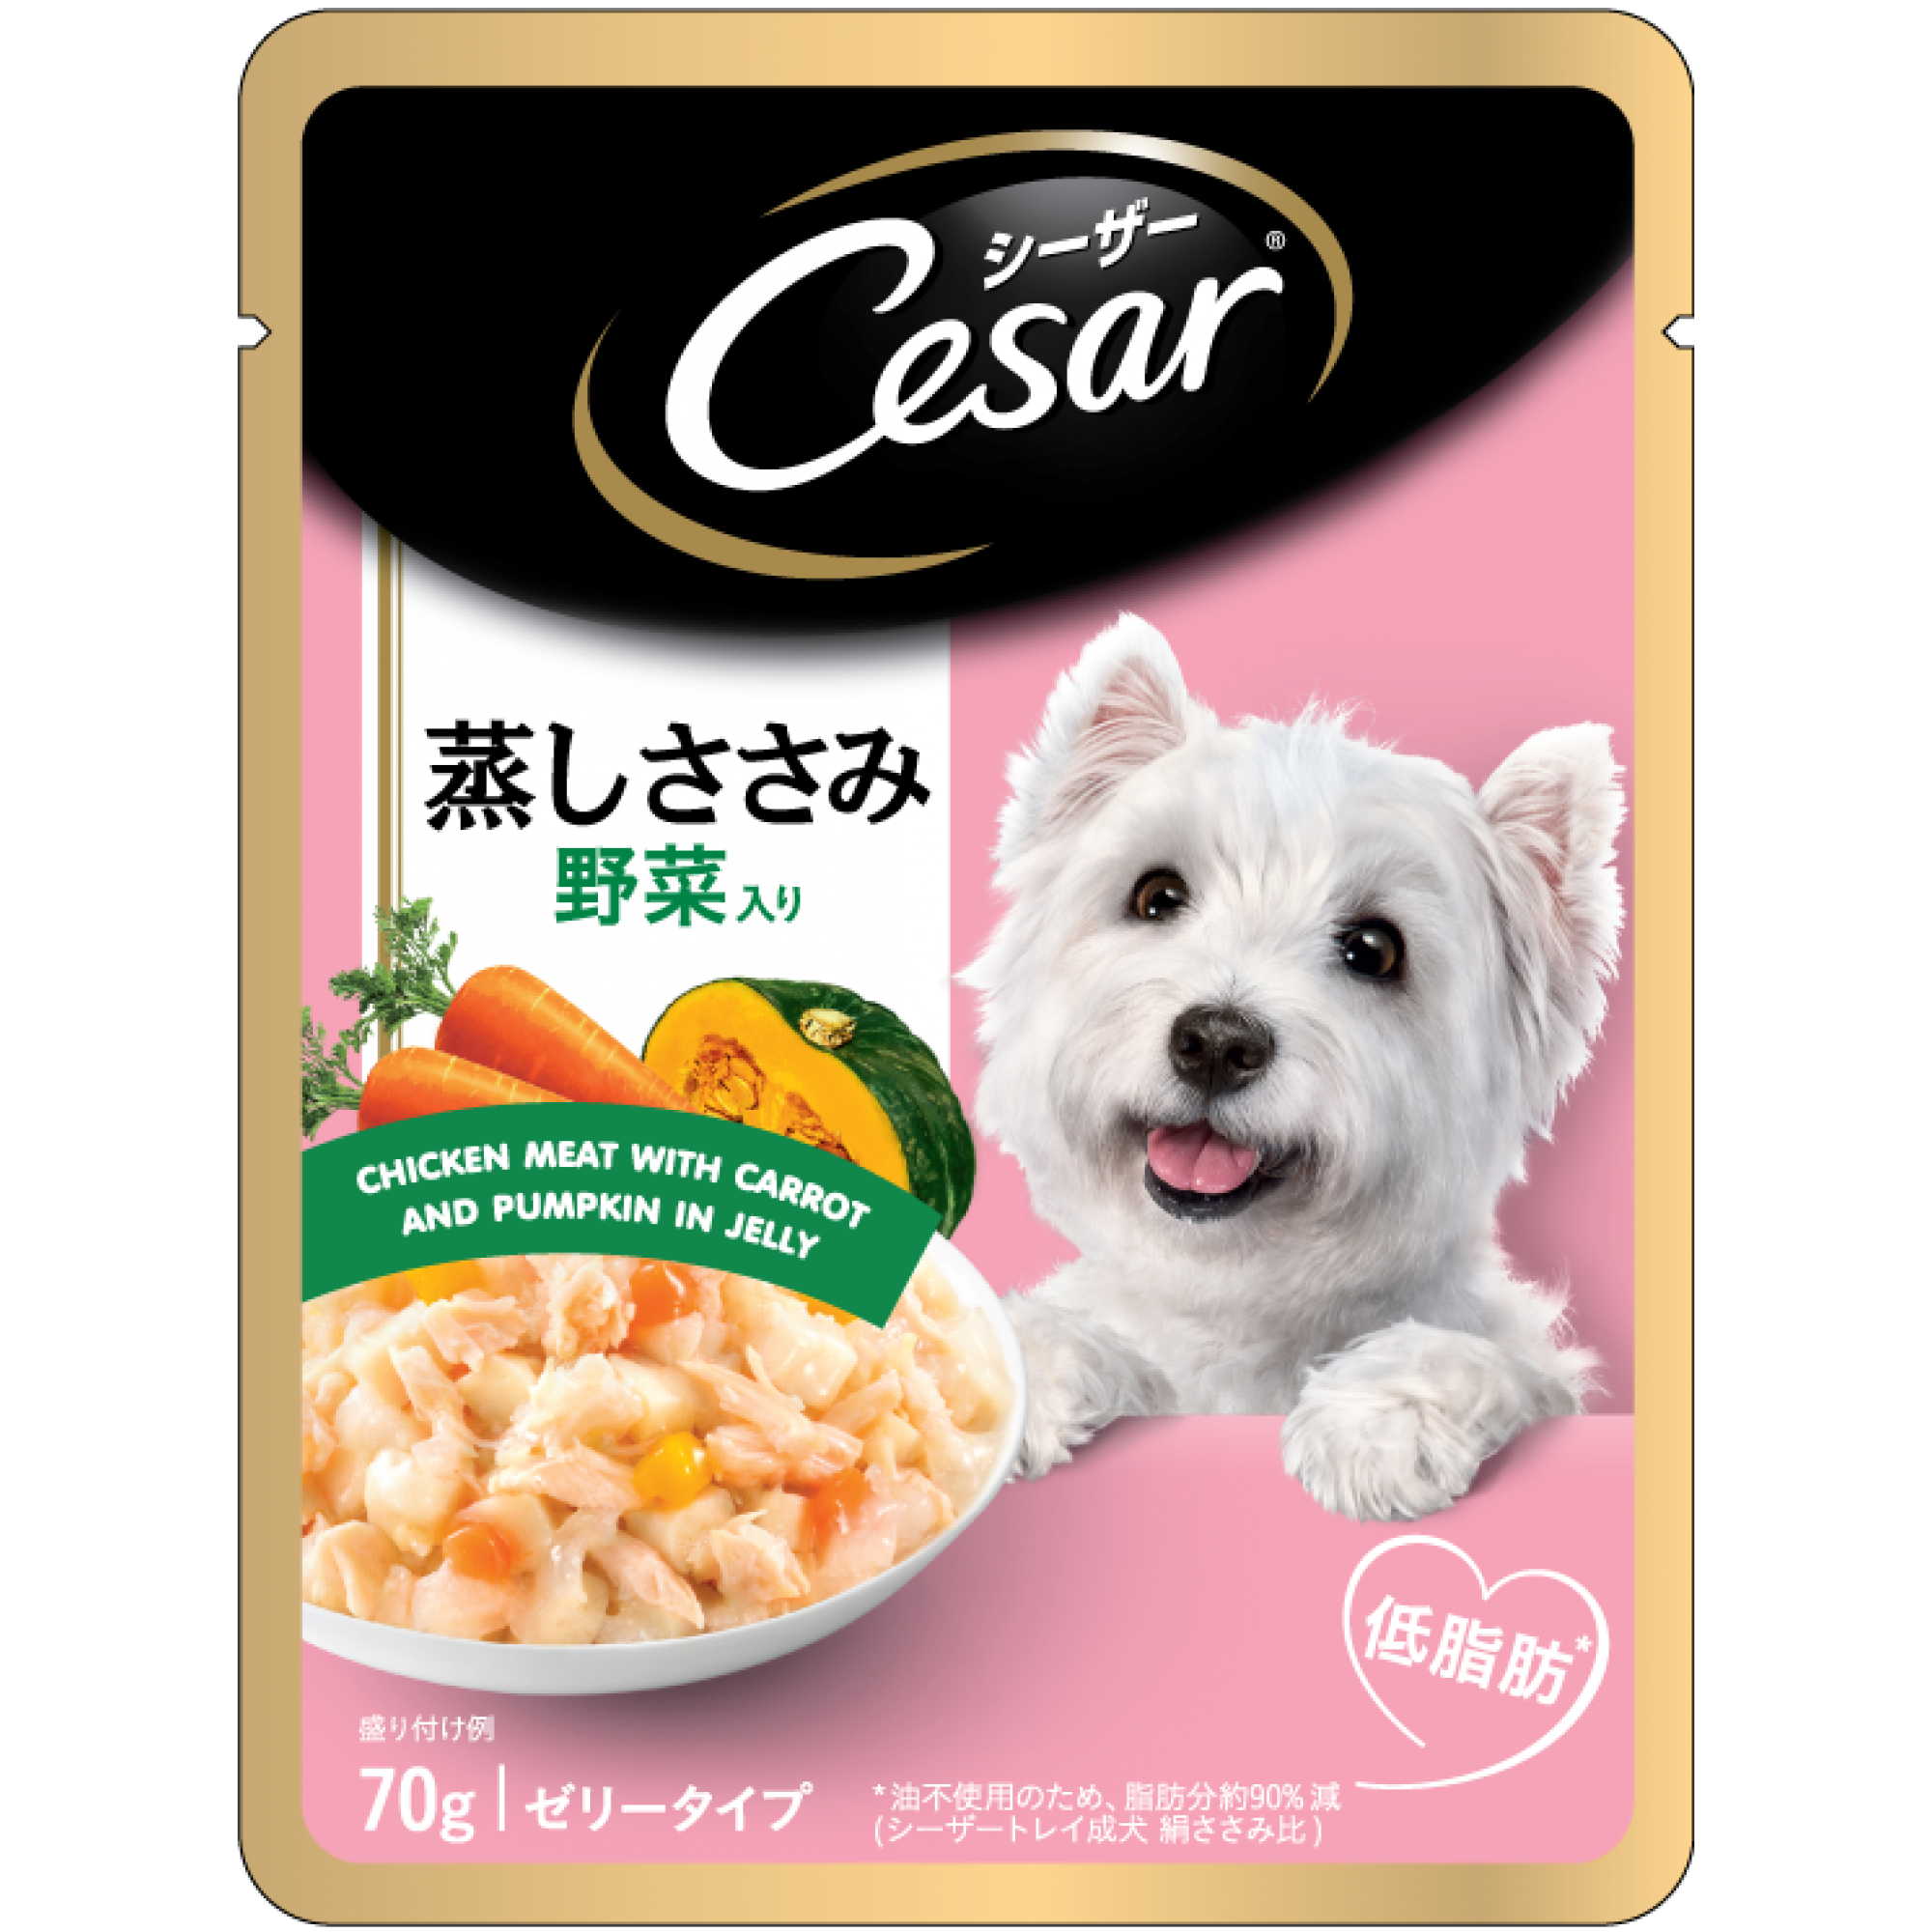 Cesar - Pouch - Chicken Meat with Carrot and Pumpkin in Jelly 70g